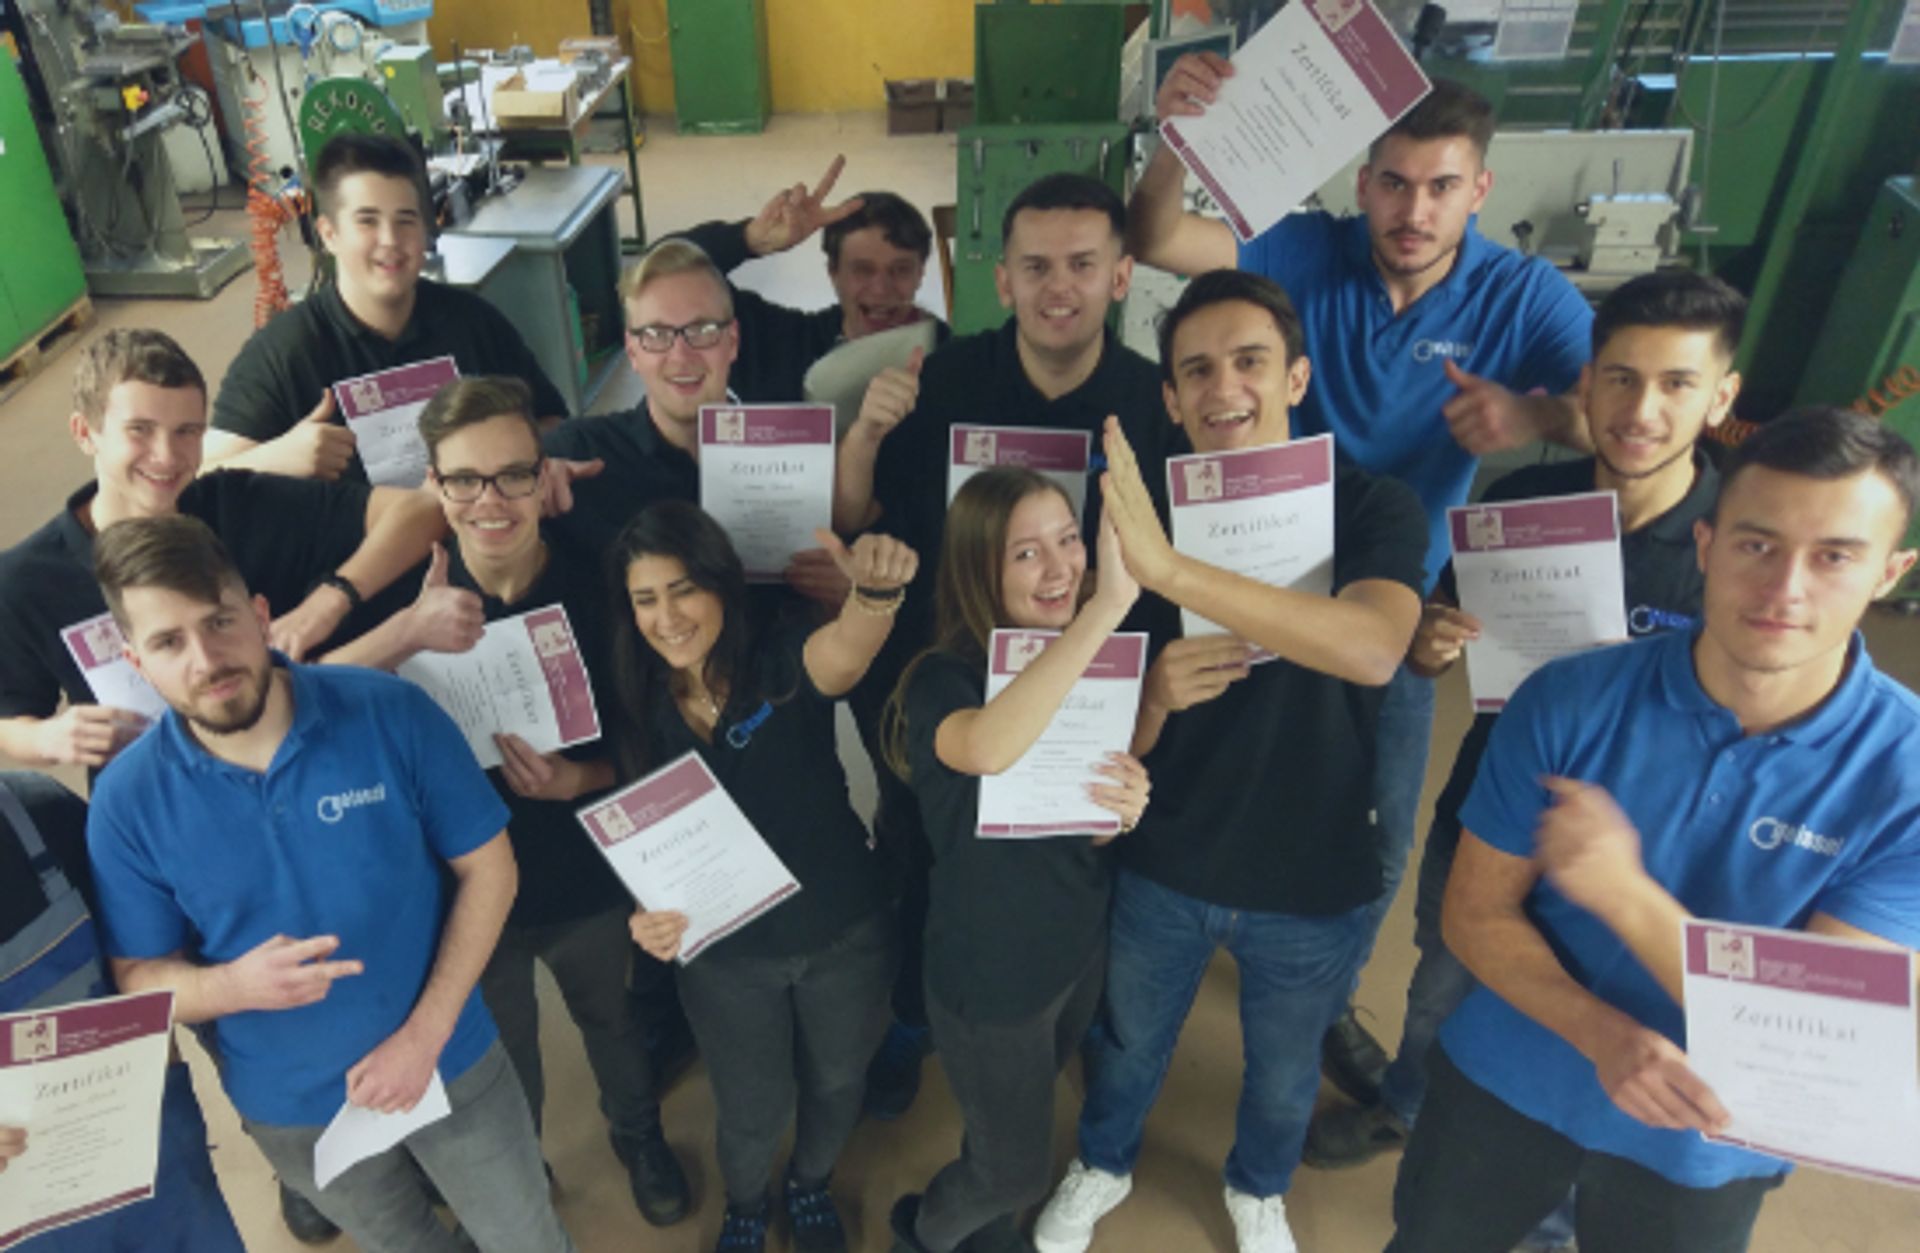 Our trainees are pleased with their awards